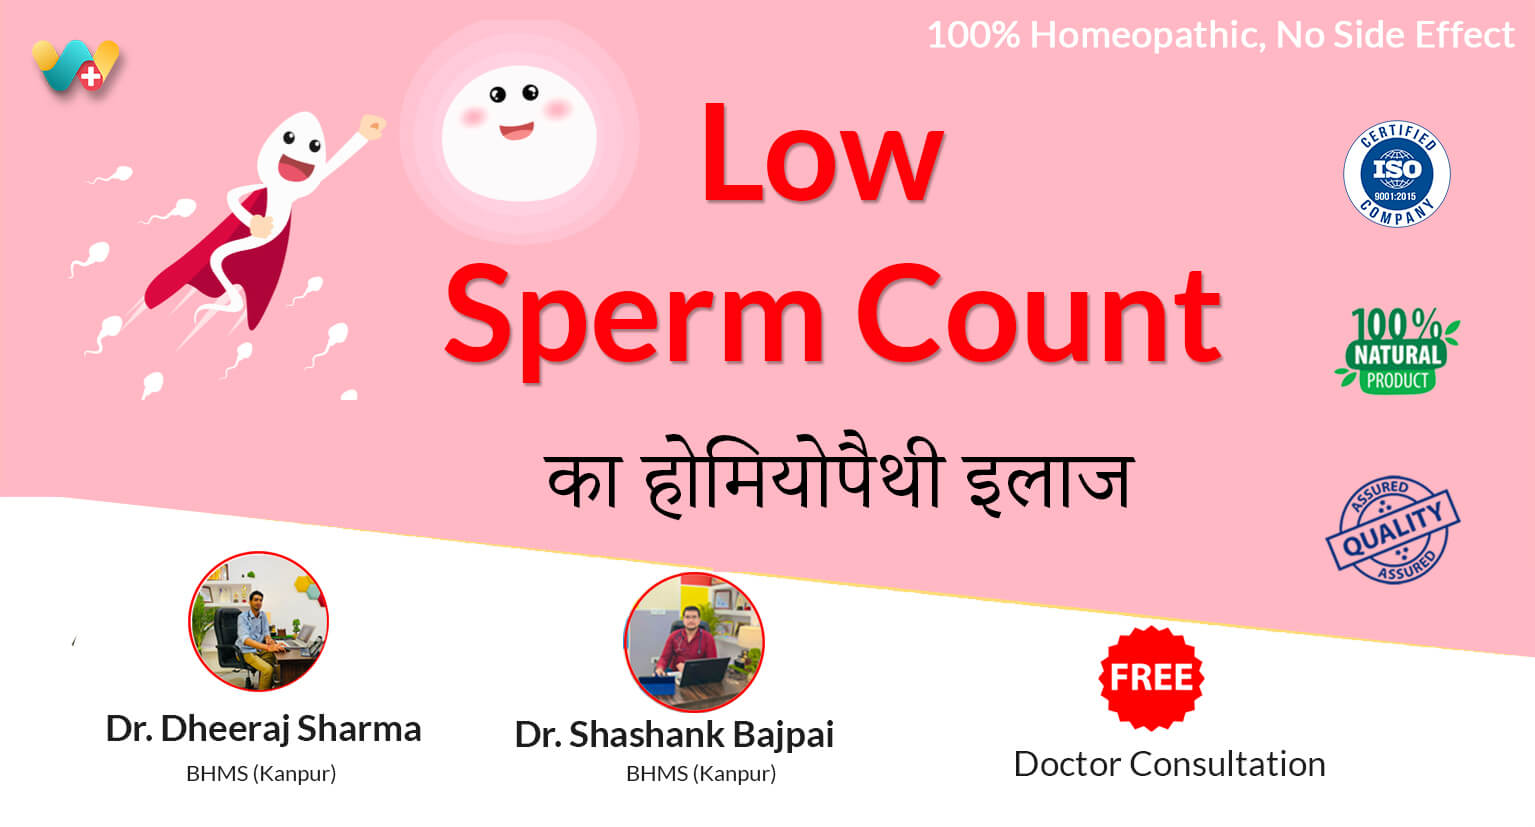 Sexual Disorders WeClinic Homeopathy